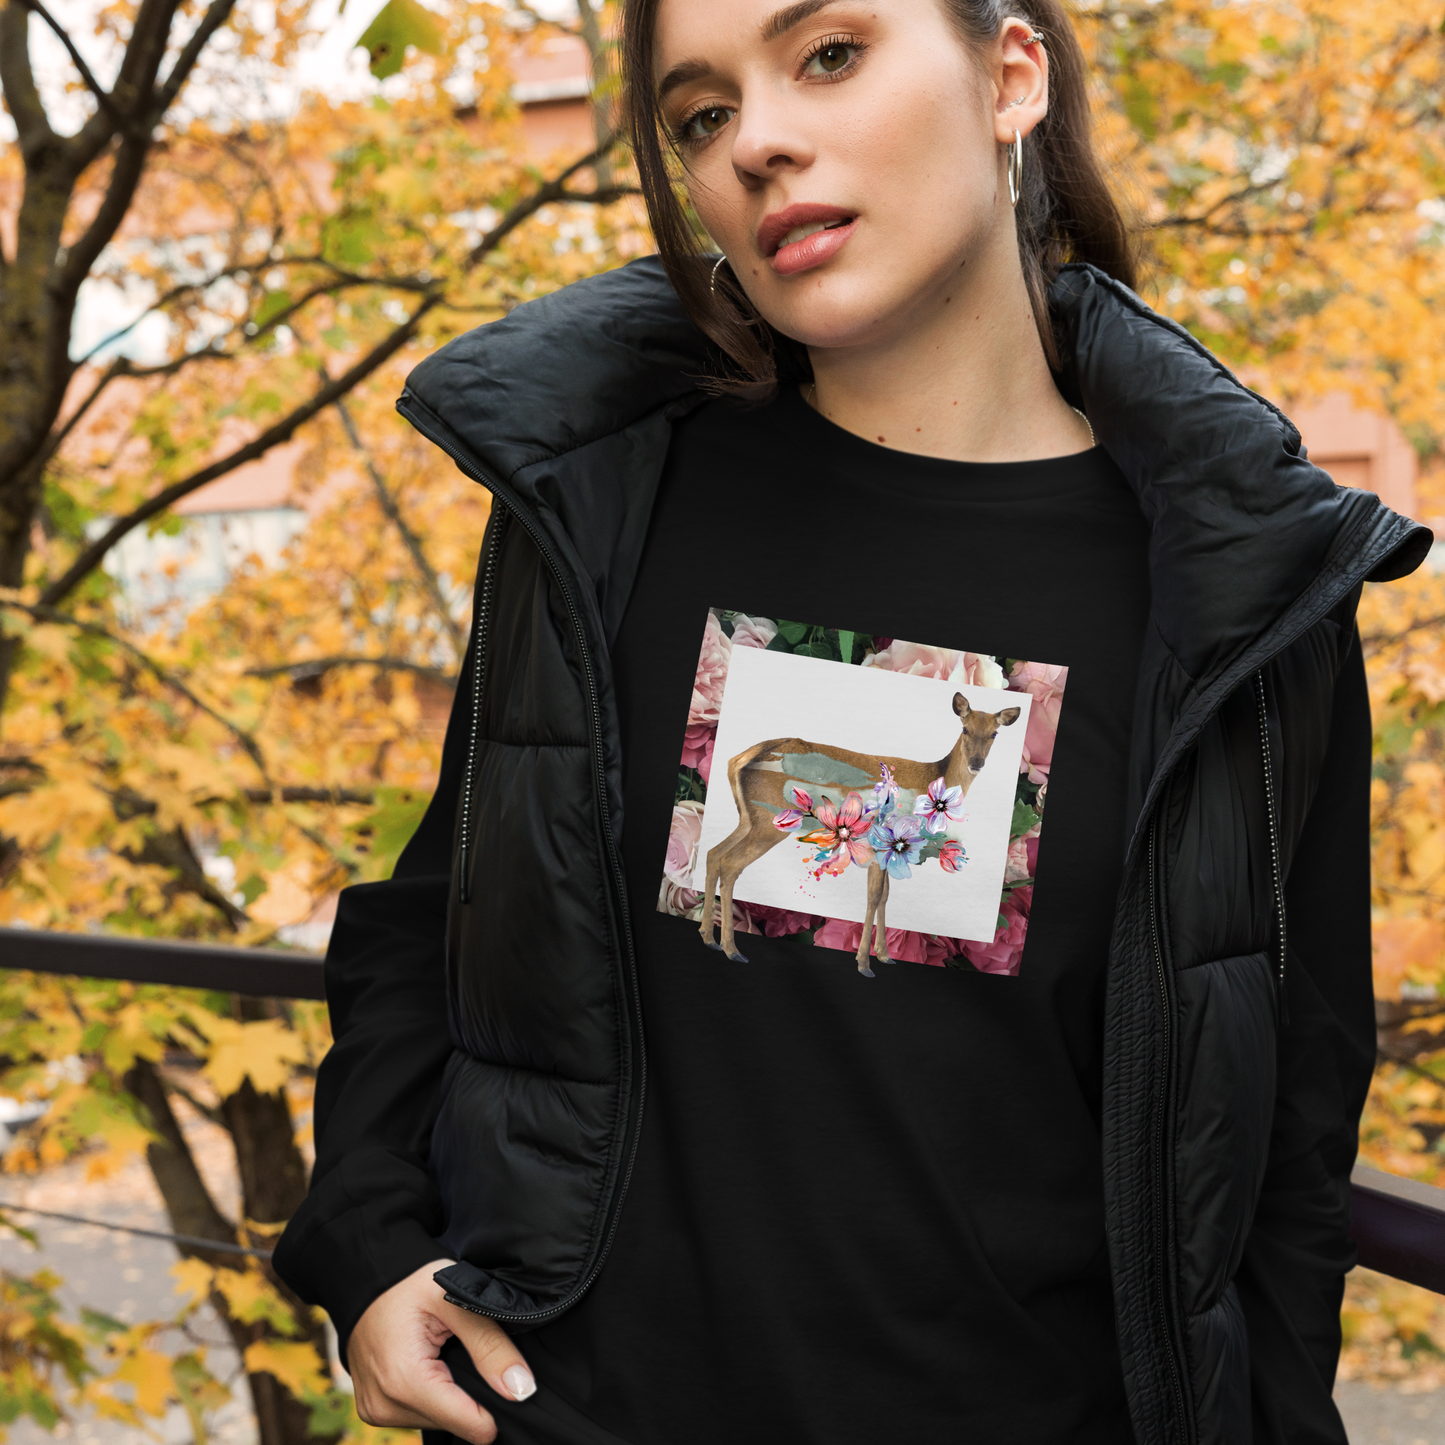 Woman Wearing a Black Deer Long Sleeve Tee featuring a captivating Floral Deer graphic on the chest - Cute Deer Long Sleeve Graphic Tees - Boozy Fox